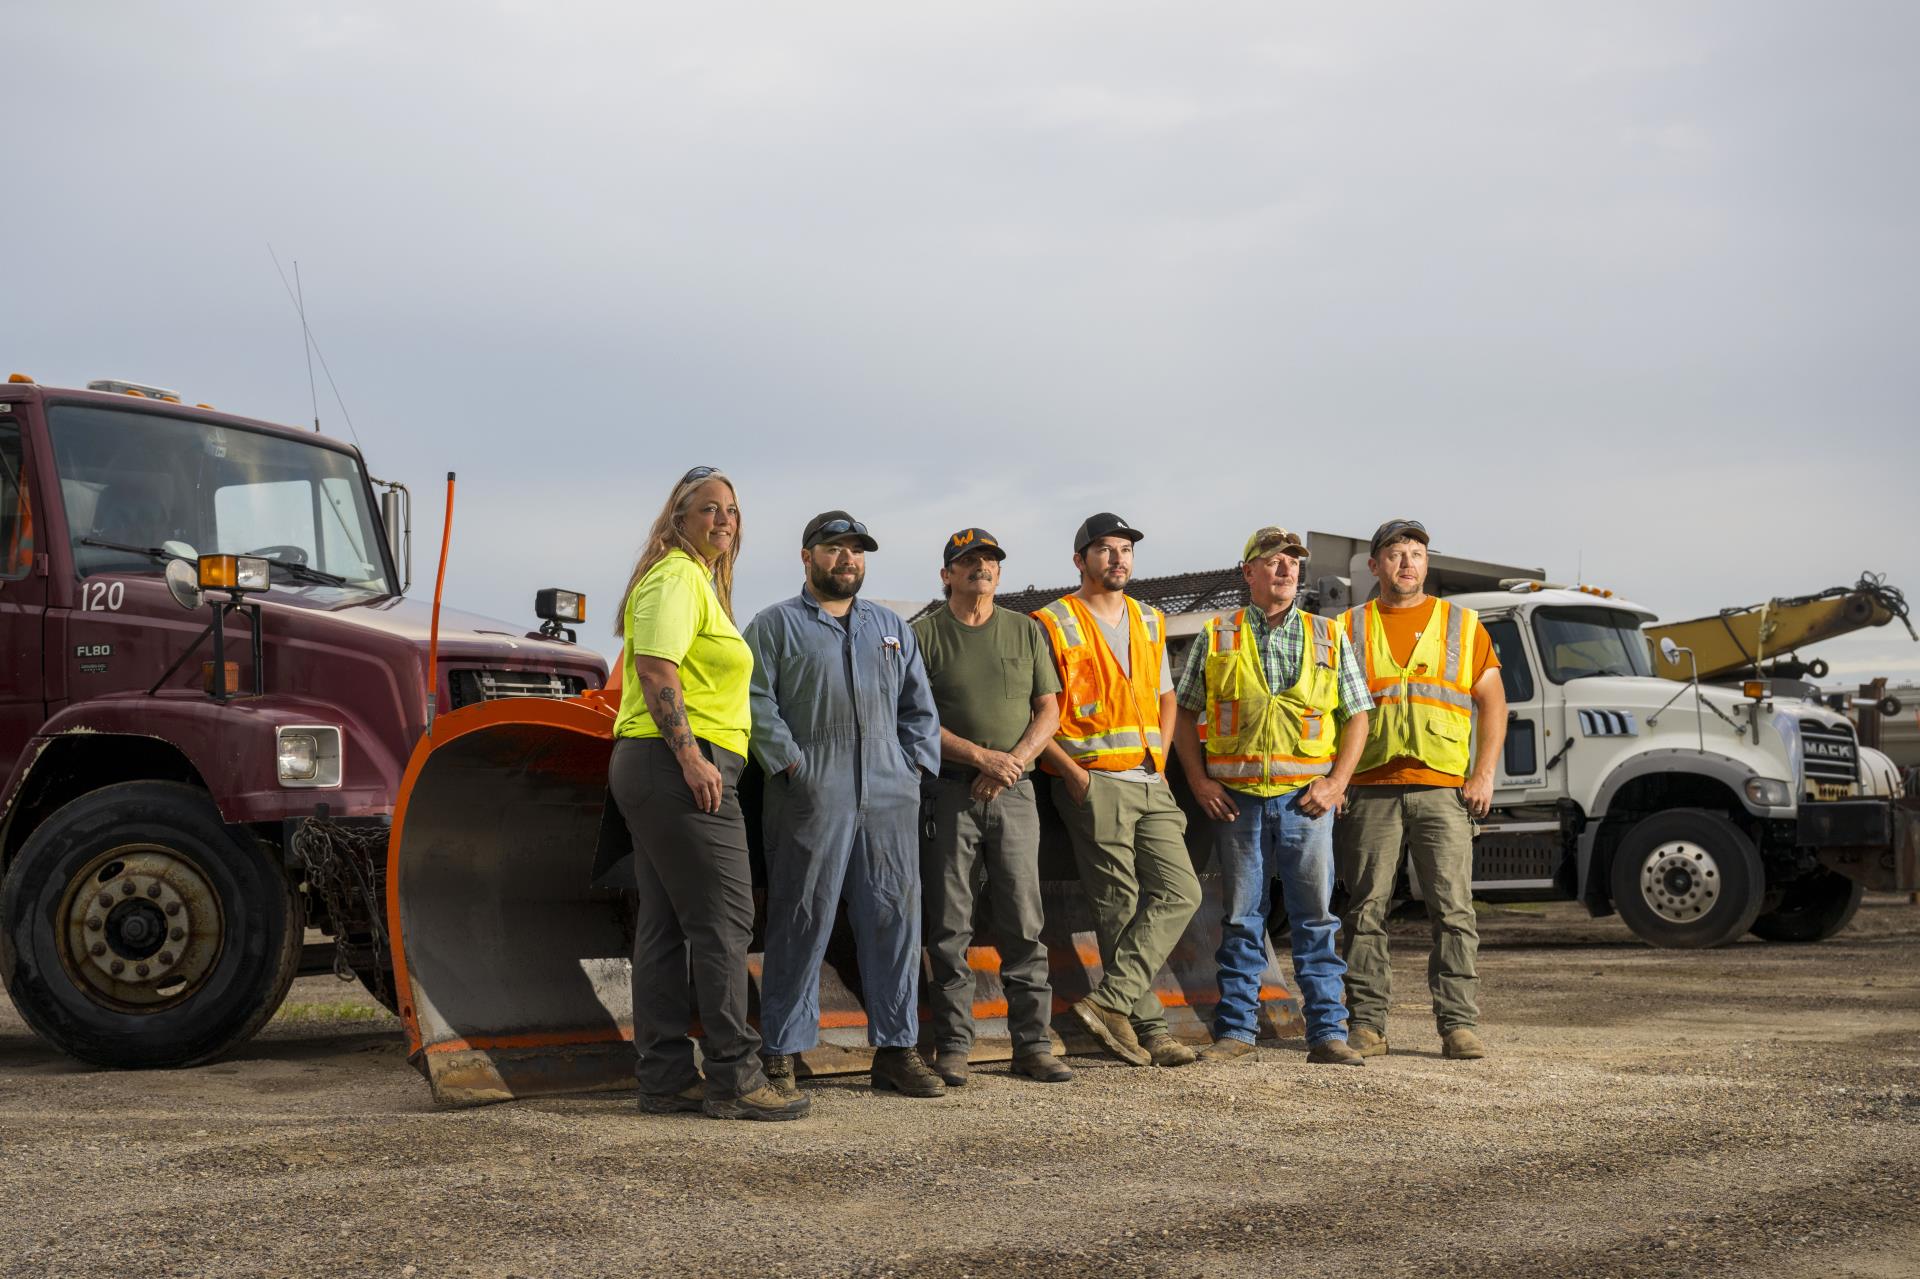 Public Works staff in a high-vis vest standing in front of machinery